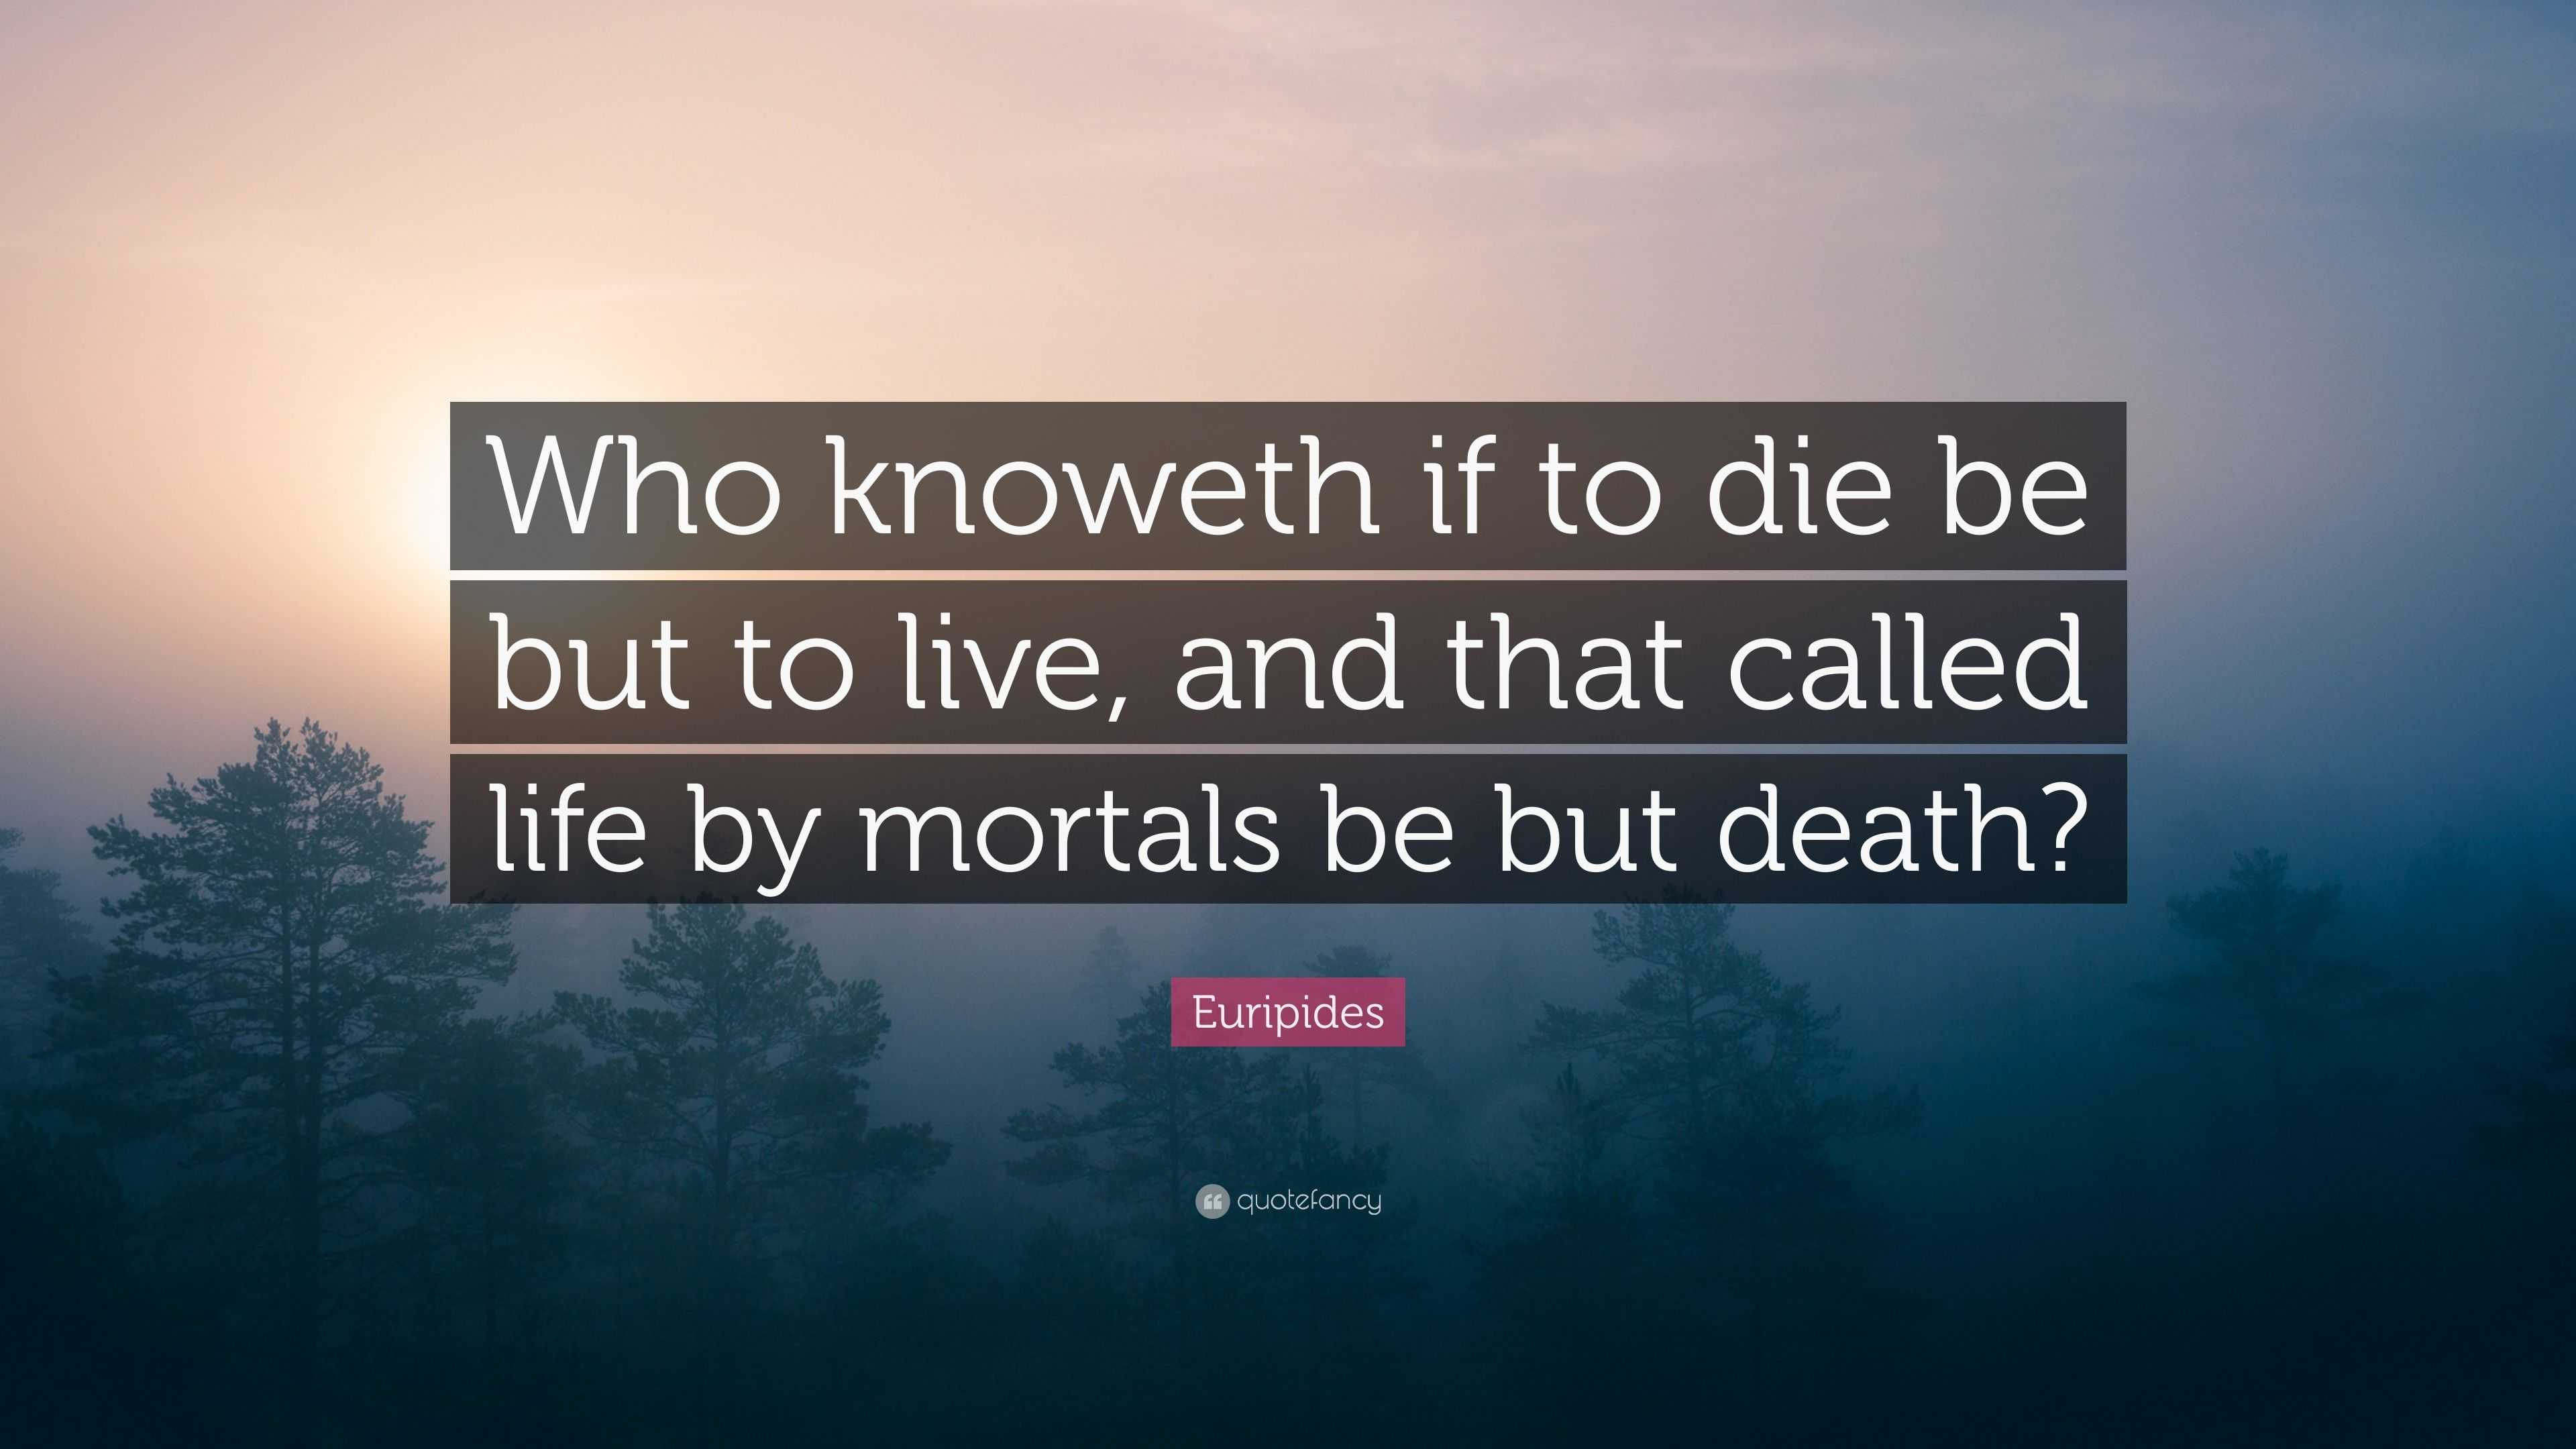 Euripides Quote: “Who knoweth if to die be but to live, and that called ...